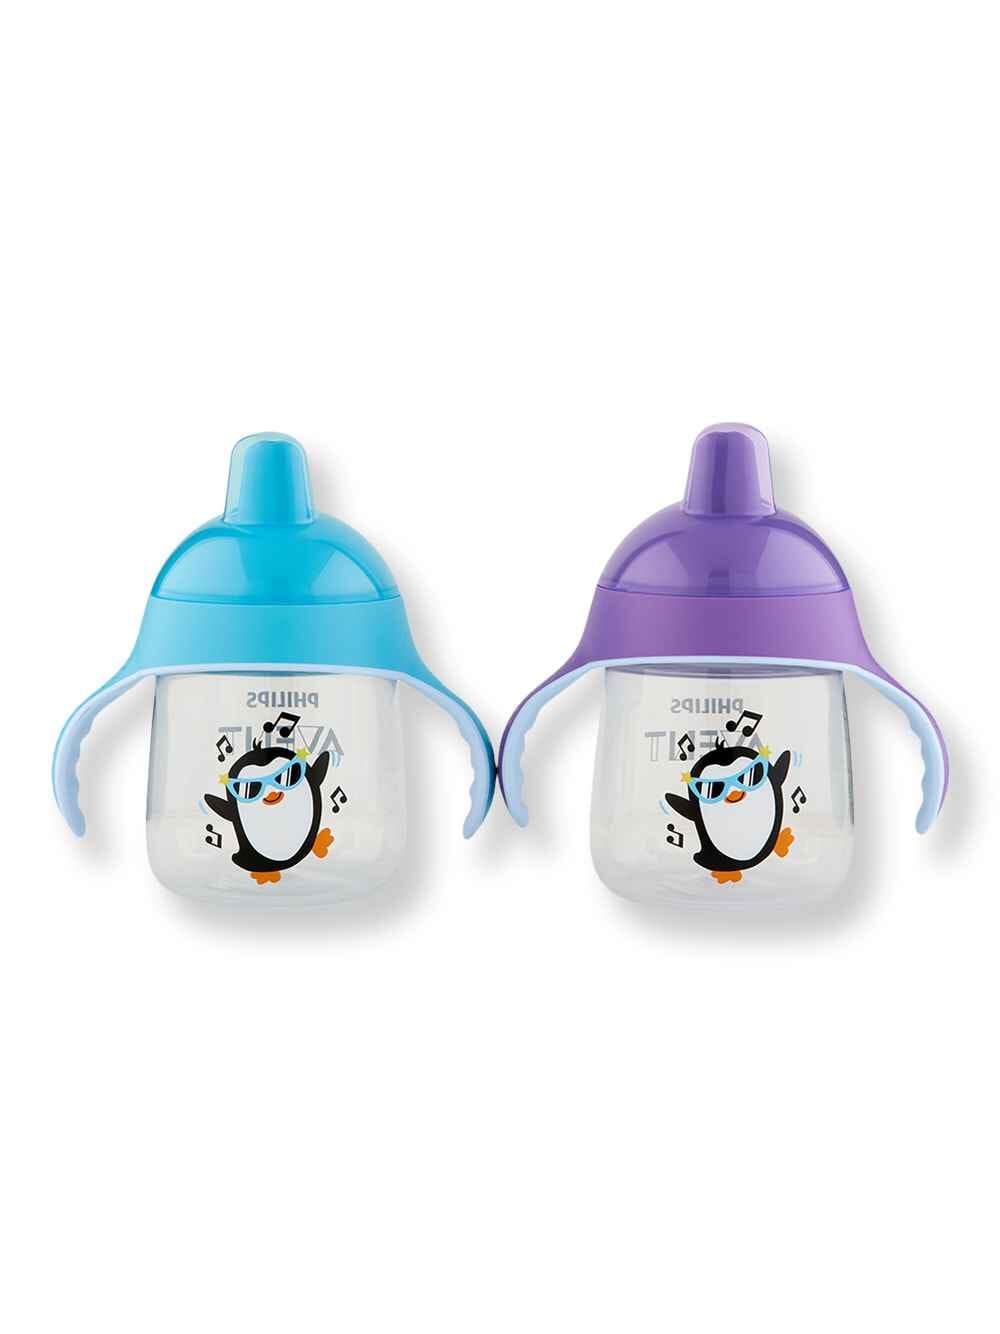 https://editorspick.com/cdn/shop/files/philips-avent-philips-avent-my-little-sippy-cup-purple-teal-9-oz-sippy-cups-mugs-727559_1000x1334.jpg?v=1699397474